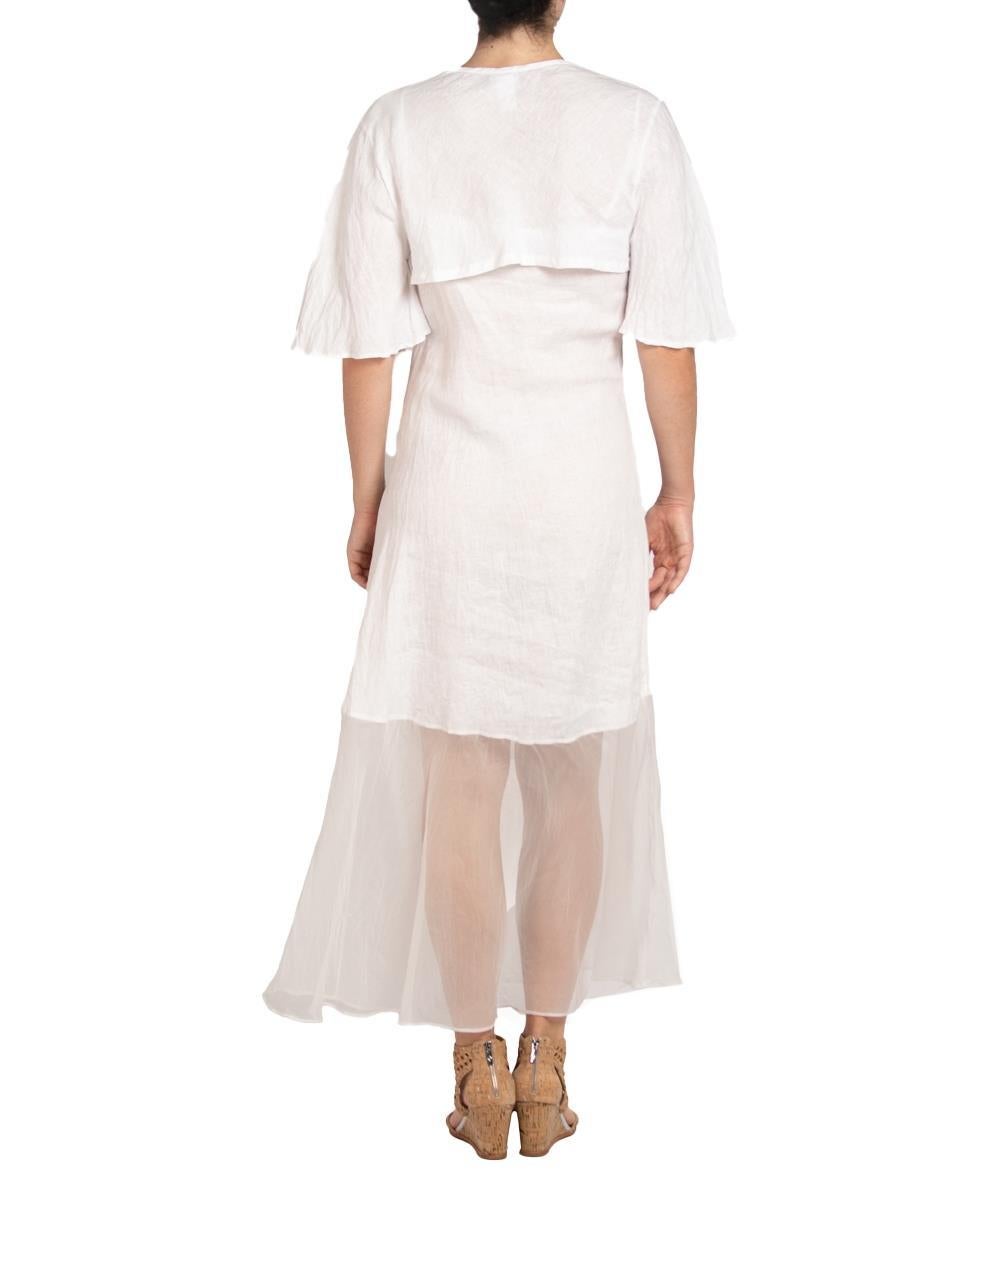 Women's MORPHEW COLLECTION White Linen Bias Cut Dress With Jacket For Sale